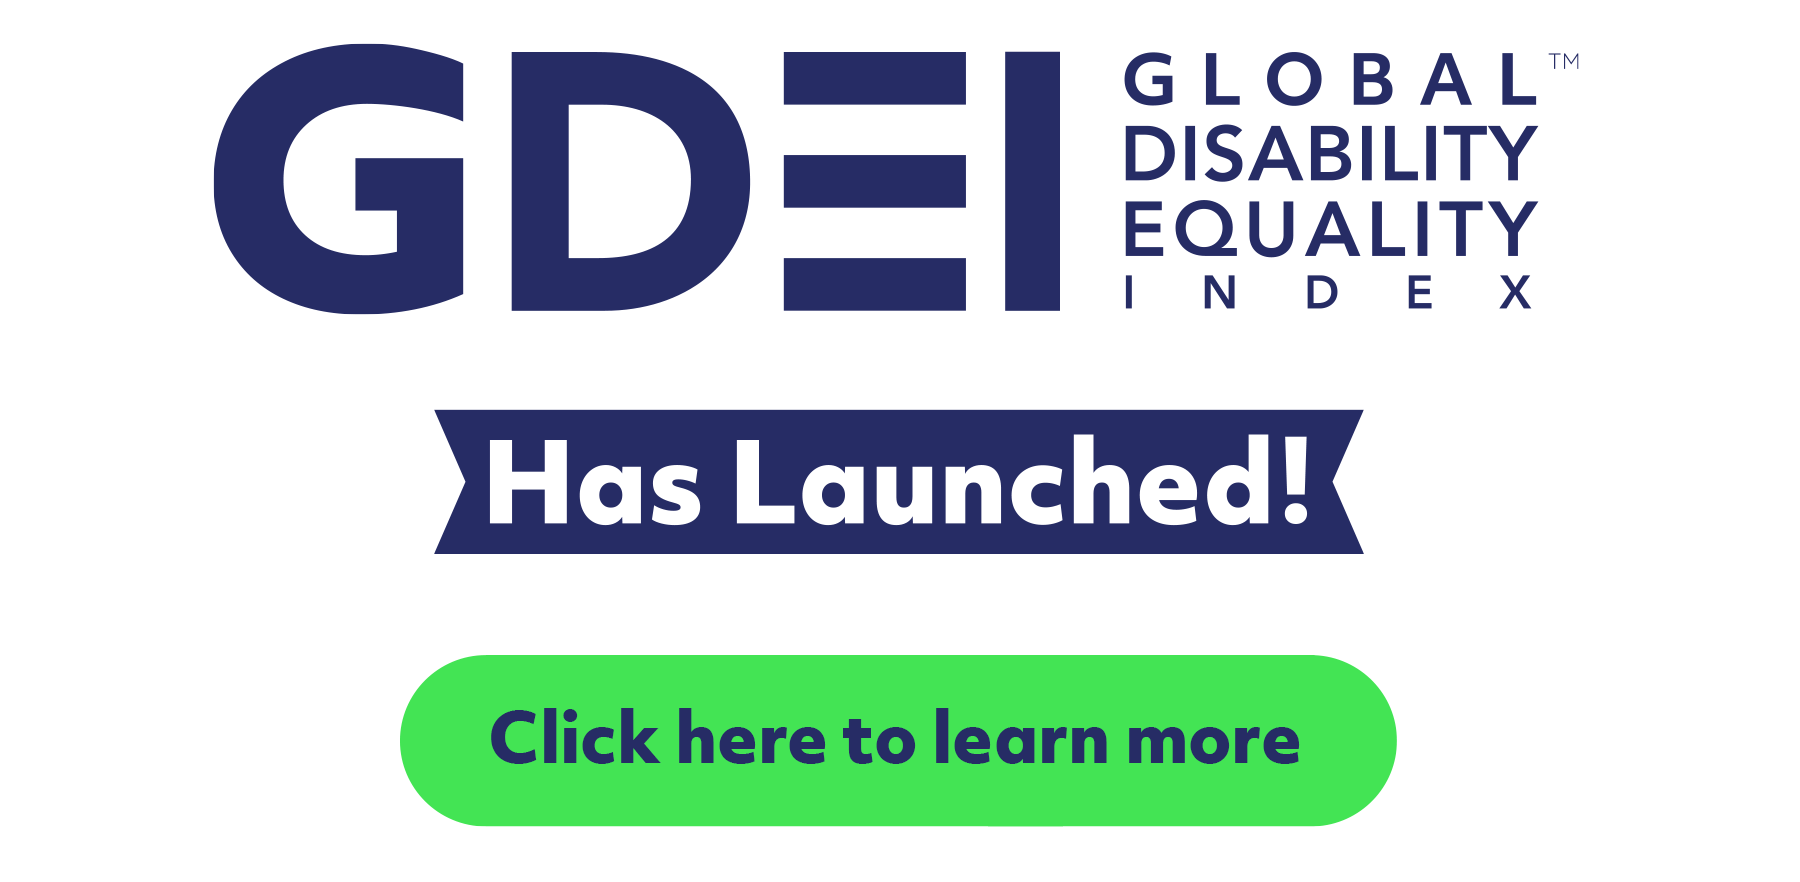 The Global DEI has launched! Click here to register for the 2022 GDEI